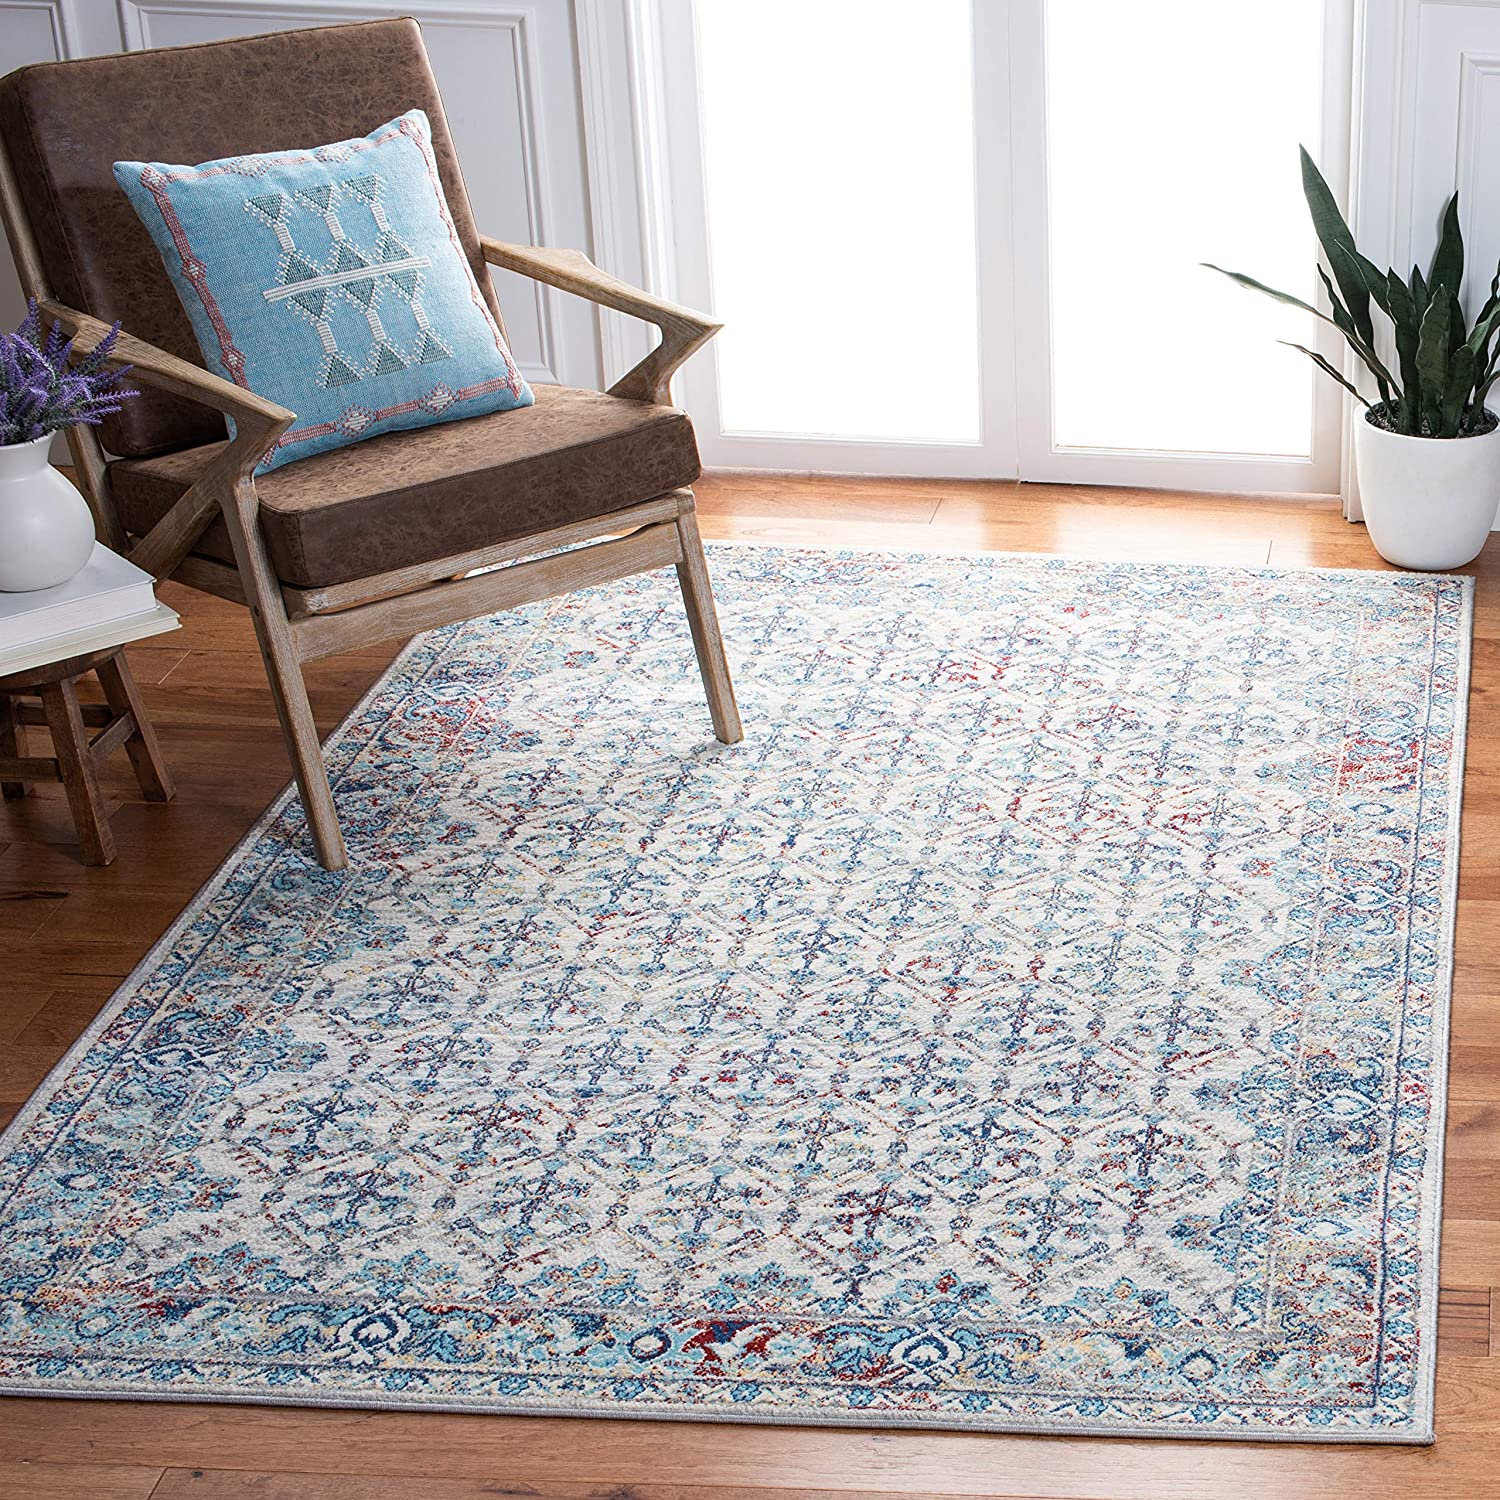 5'3" x 7'6" Safavieh Brentwood Collection Area Rug (Ivory/Blue) $37.70 + Free Shipping